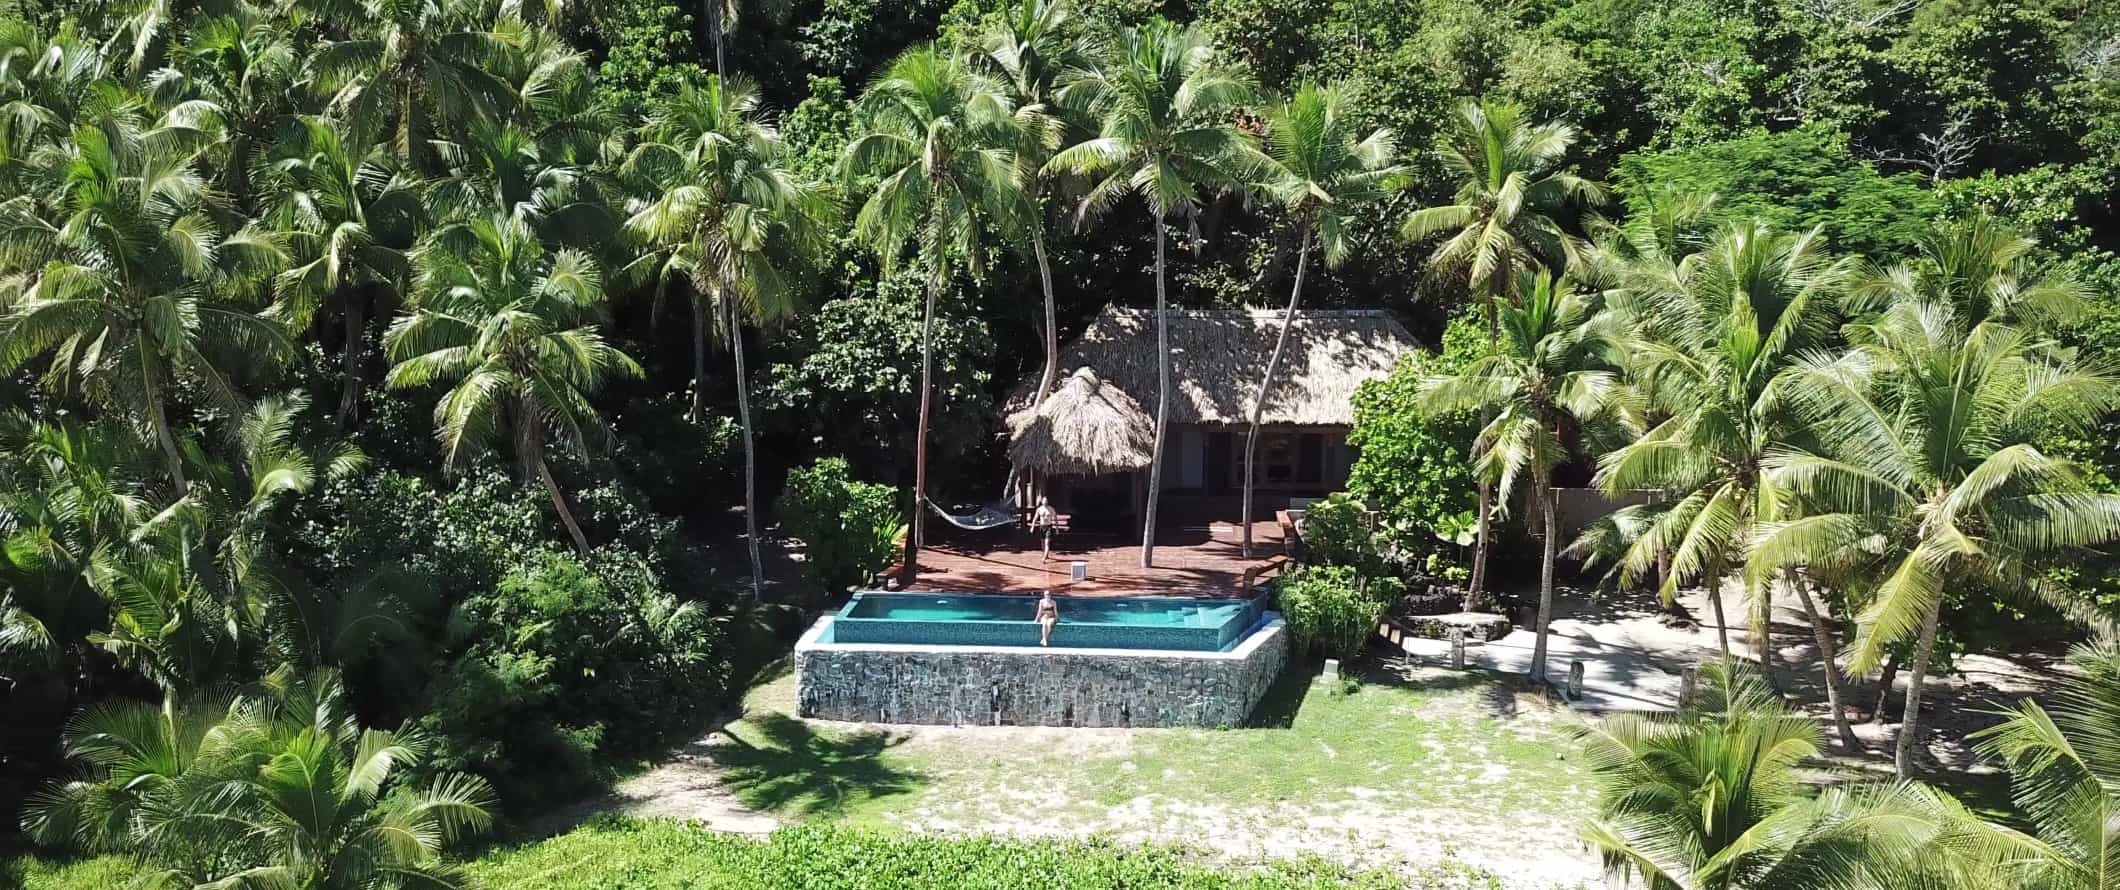 People sitting at a private pool in front of a thatched-roof hut surrounded by palm trees in the Yasawa Islands in Fiji